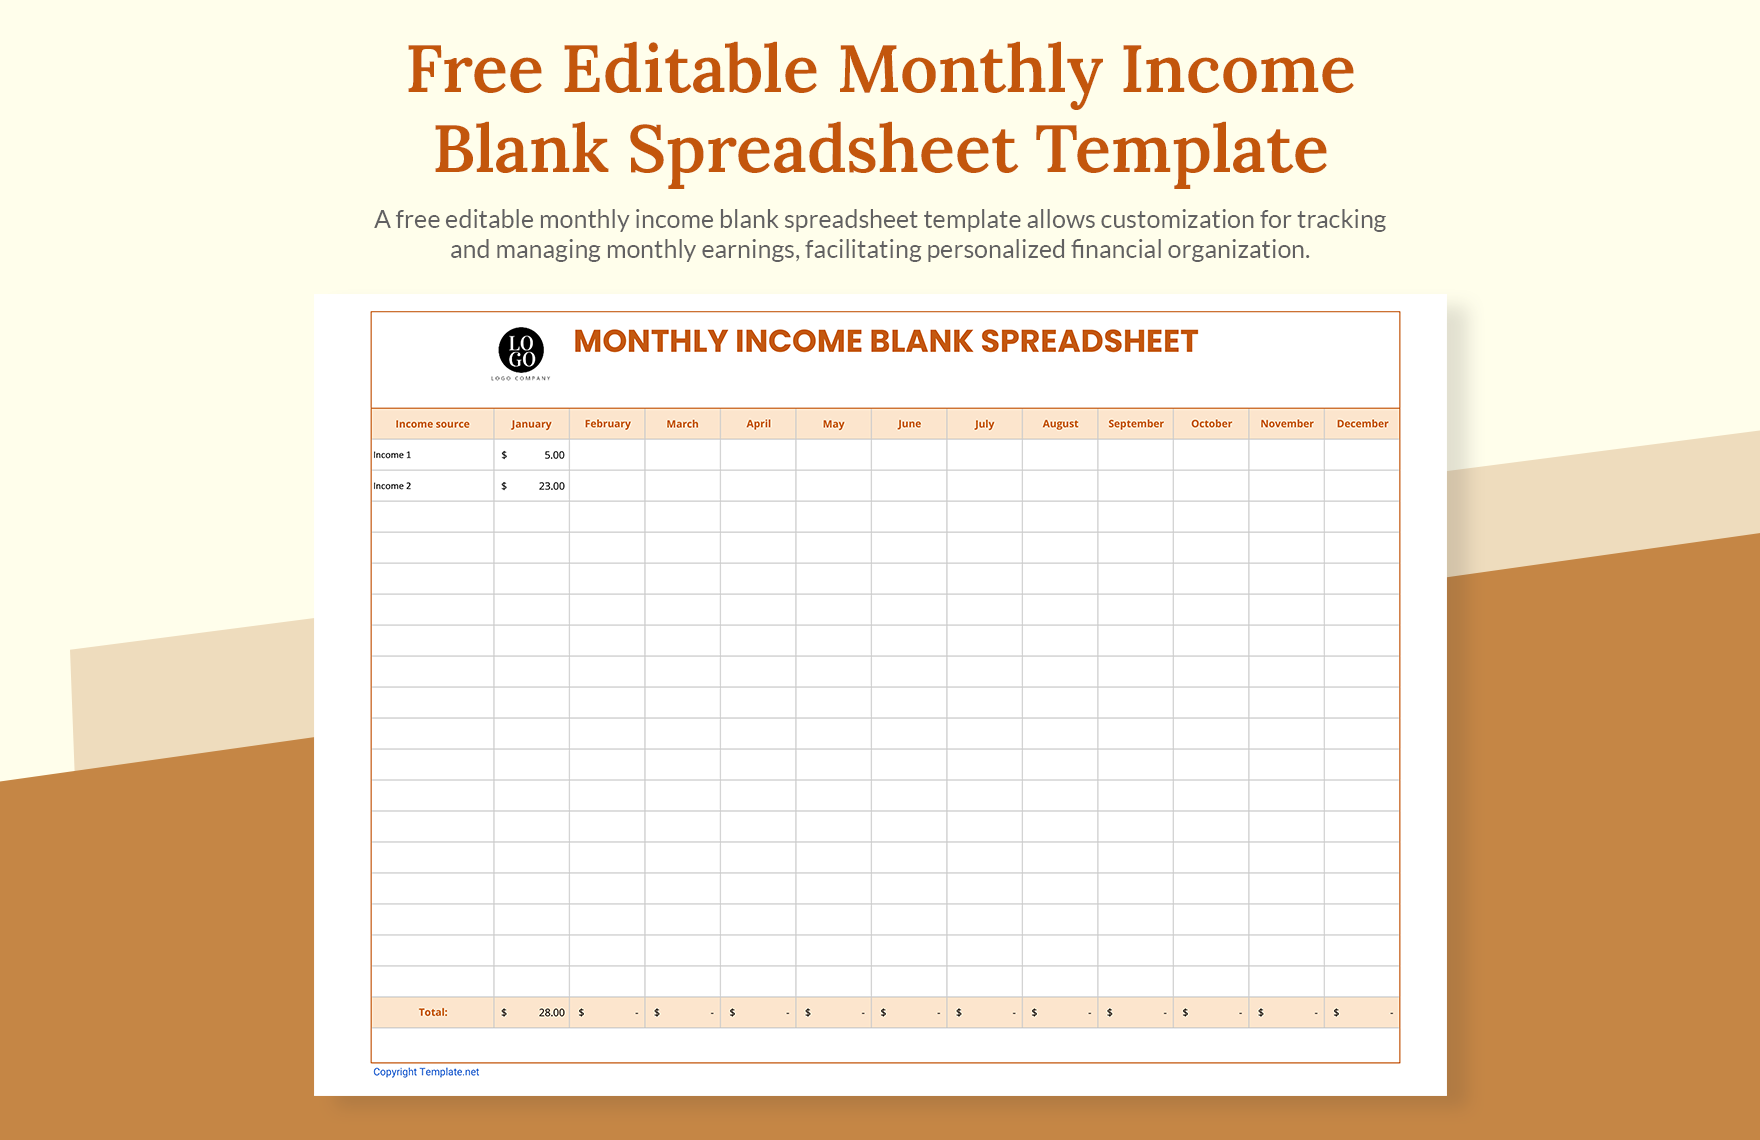 Editable Monthly Income Blank Spreadsheet Template in Word, Google Docs, Excel, Apple Pages, Apple Numbers